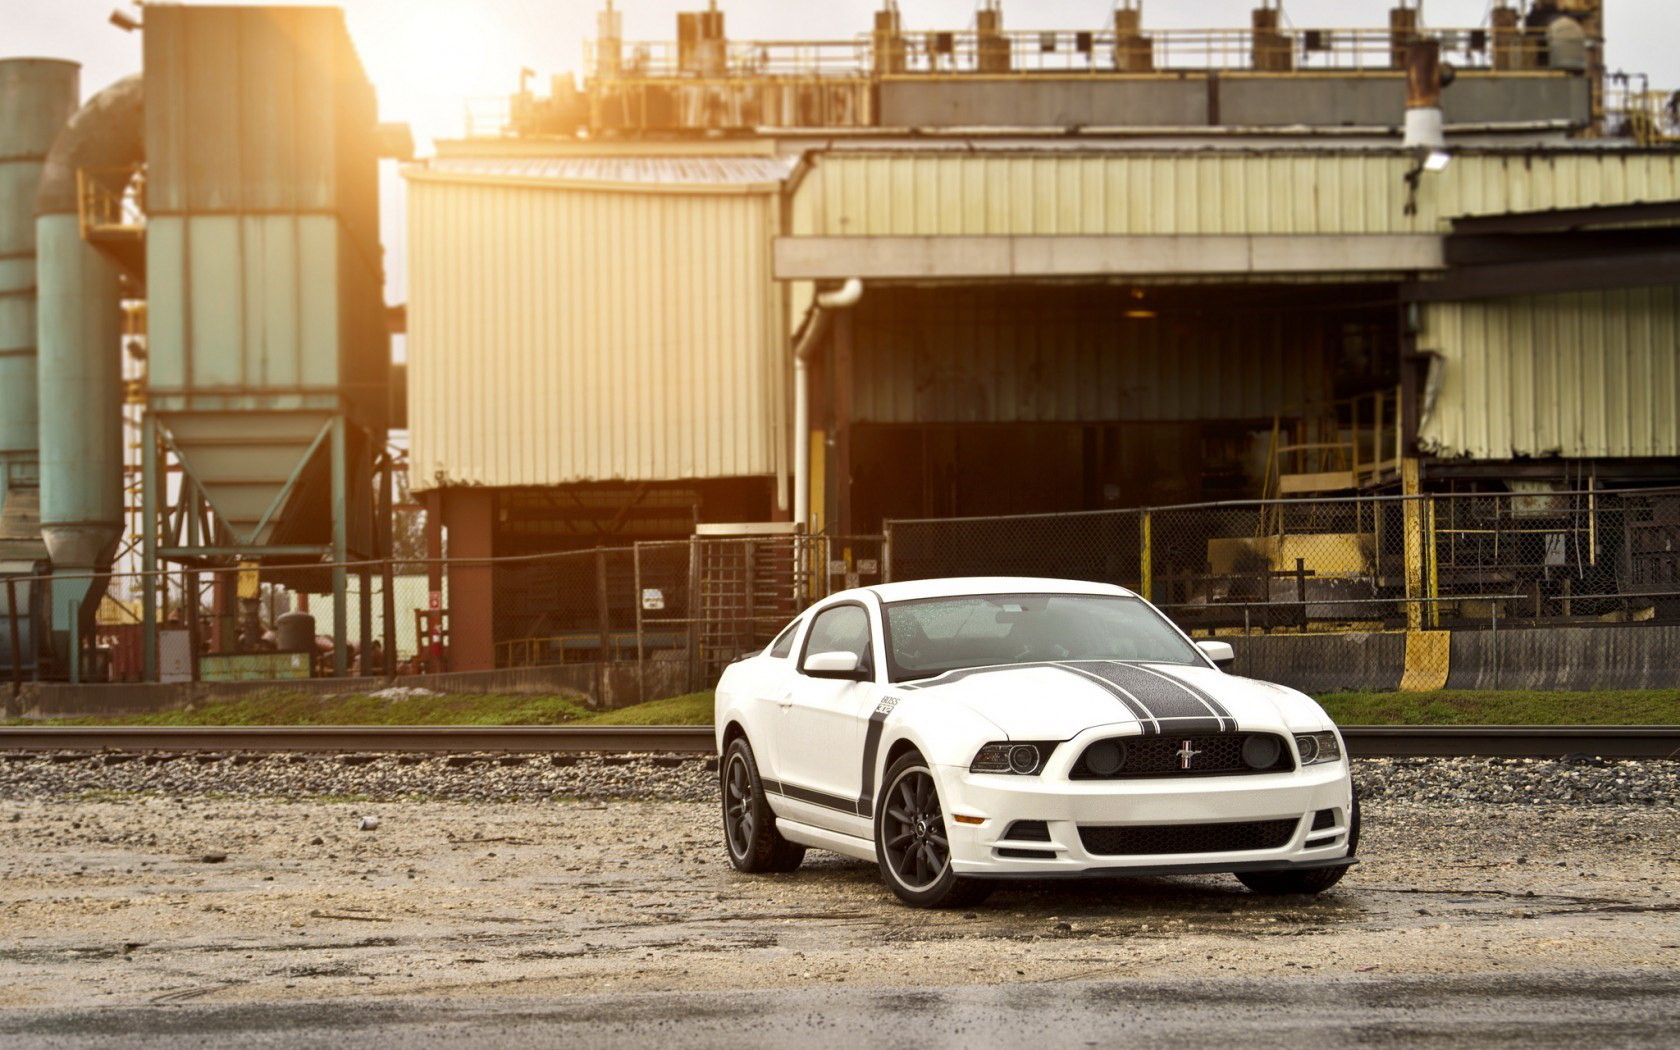 Vehicles Ford Mustang Shelby HD Wallpaper | Background Image